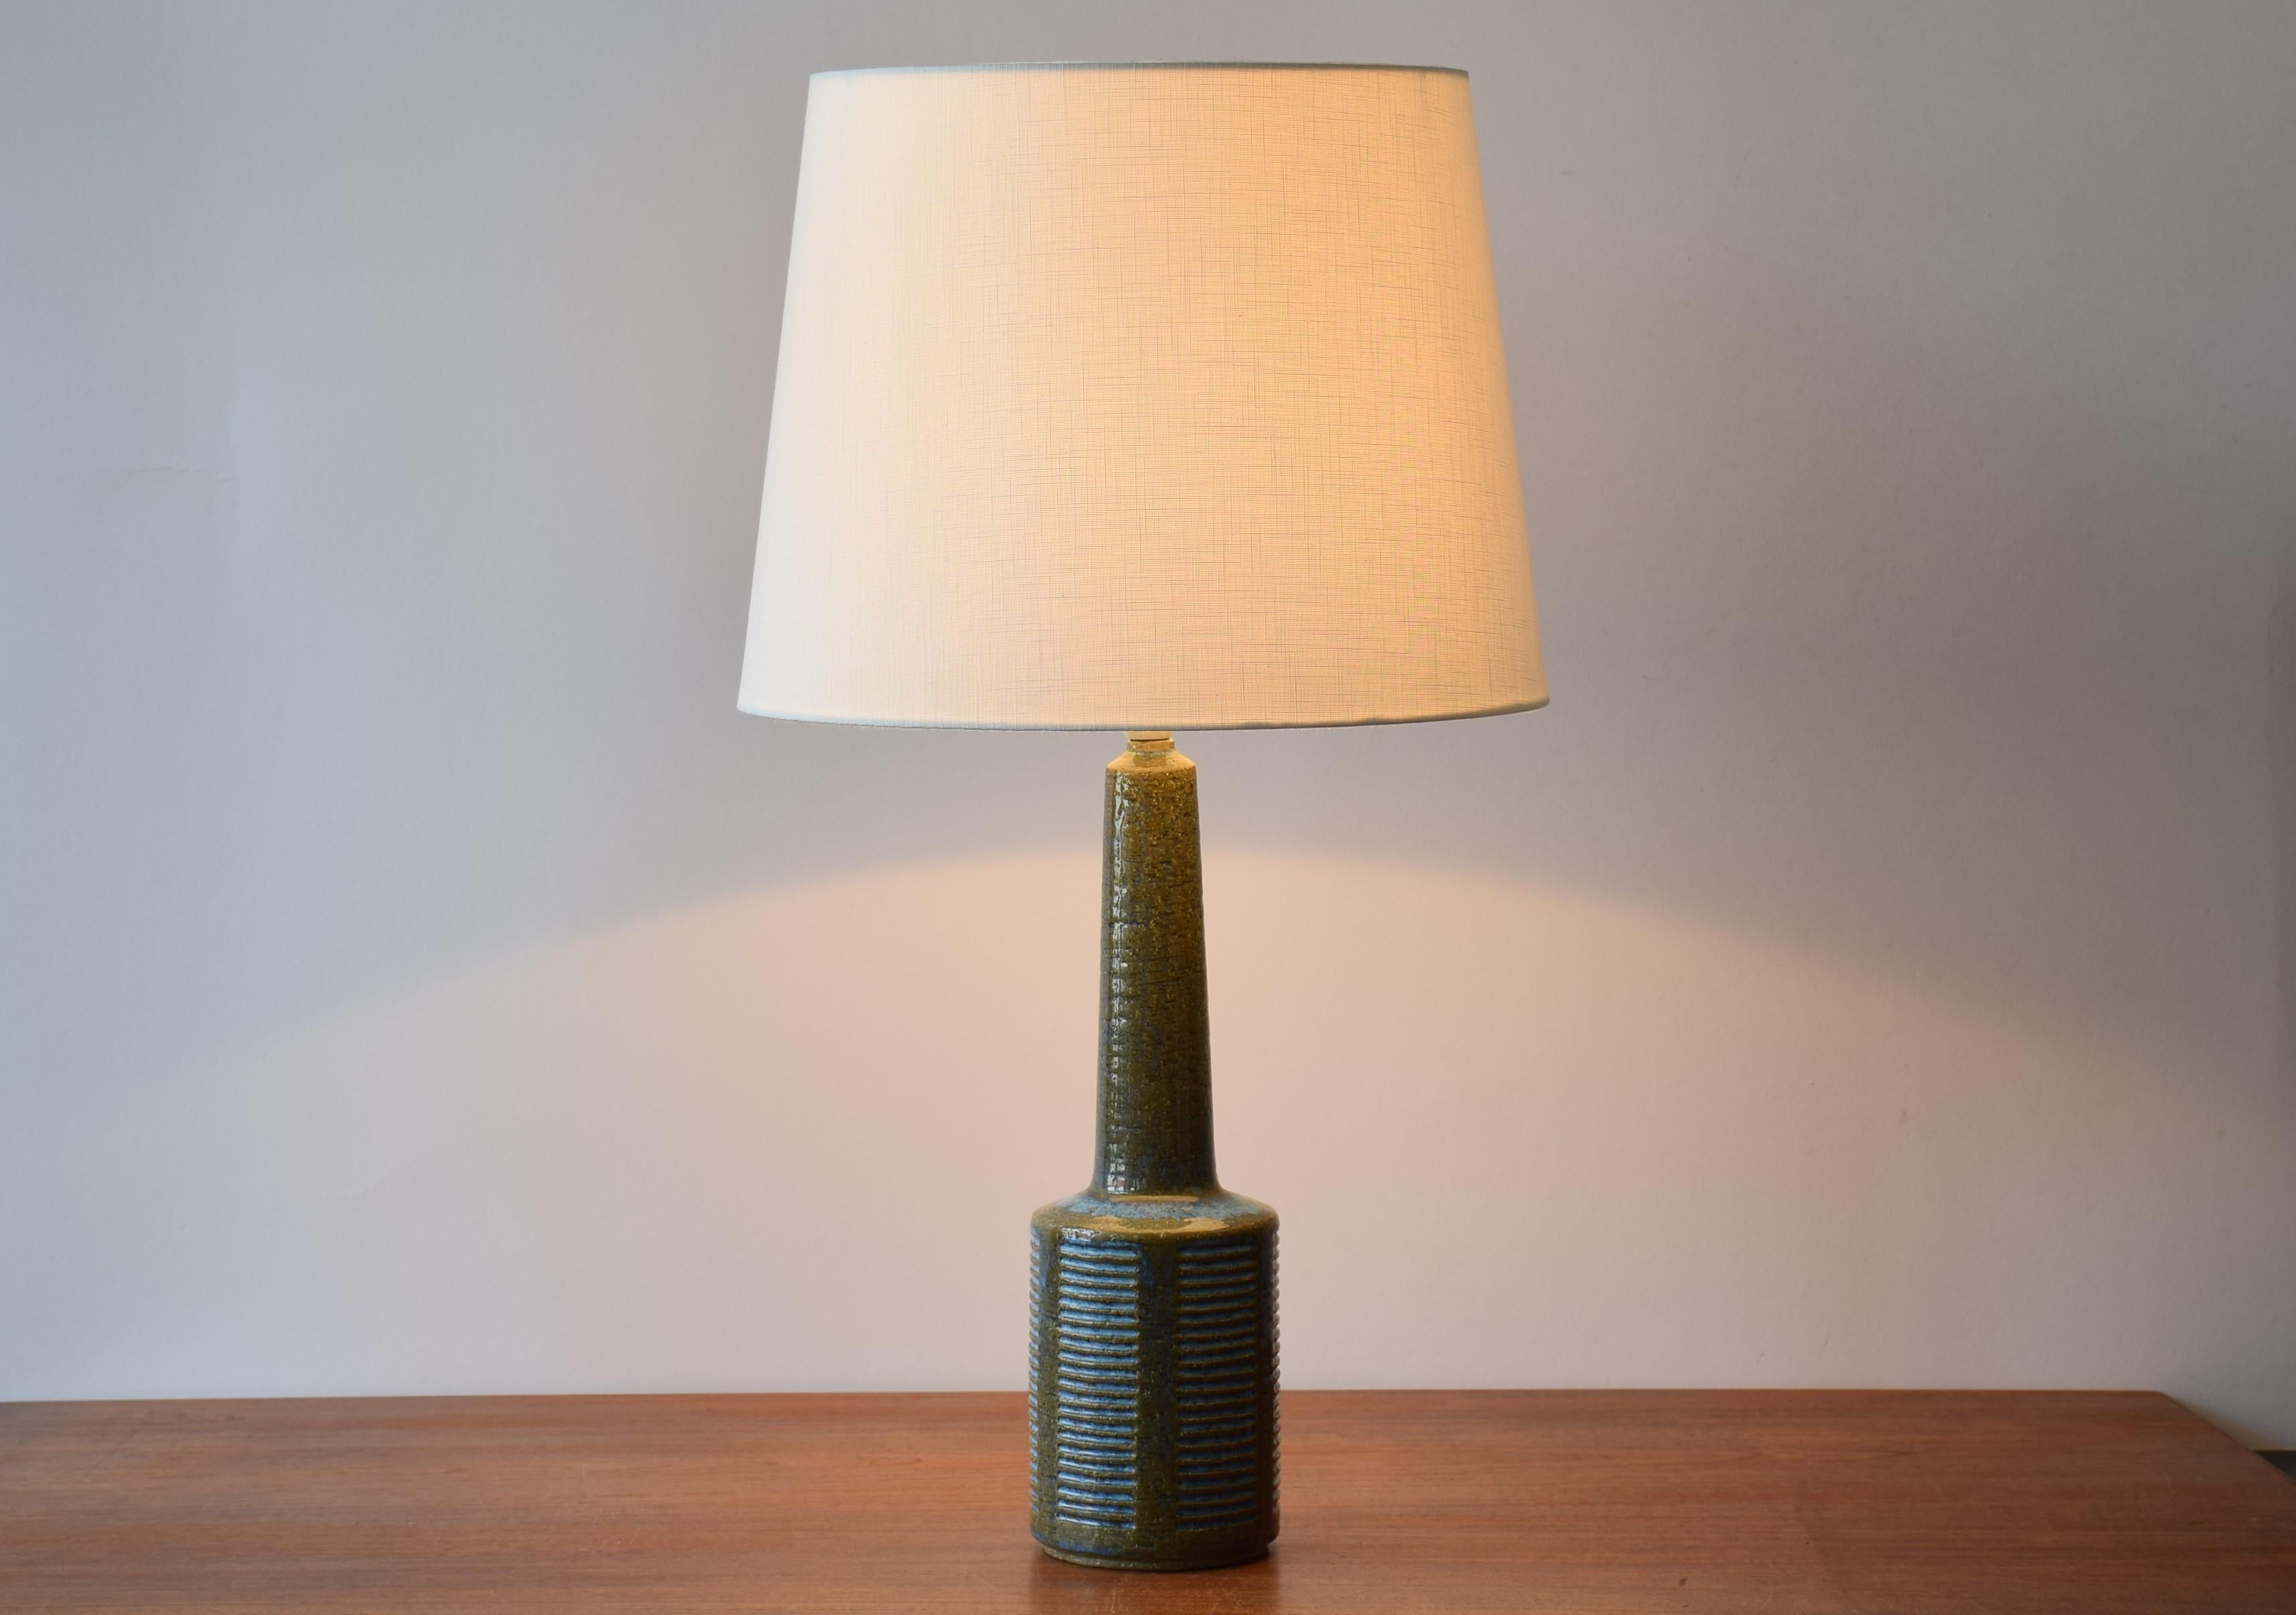 Midcentury tall table lamp from Danish Palshus.
The lamp was designed by Per Linnemann-Schmidt and produced, circa 1960s.
It is made with chamotte clay which gives a rough and vivid surface. The glaze is moss green with pale blue.

Included is a